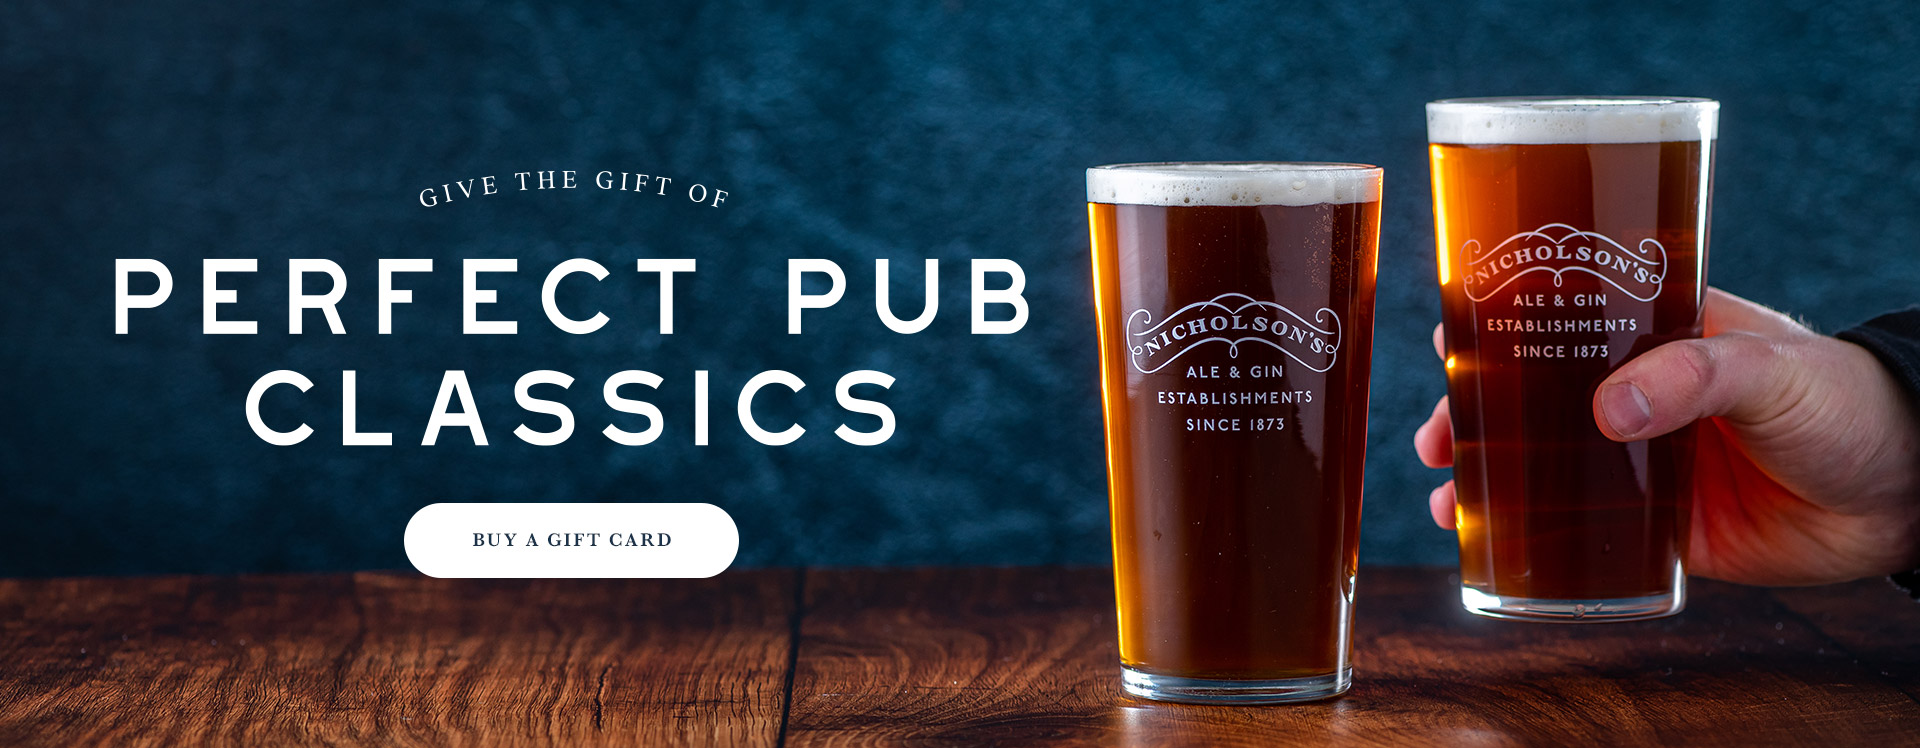 Nicholson’s Pub Gift Voucher at The Princess Of Wales in London